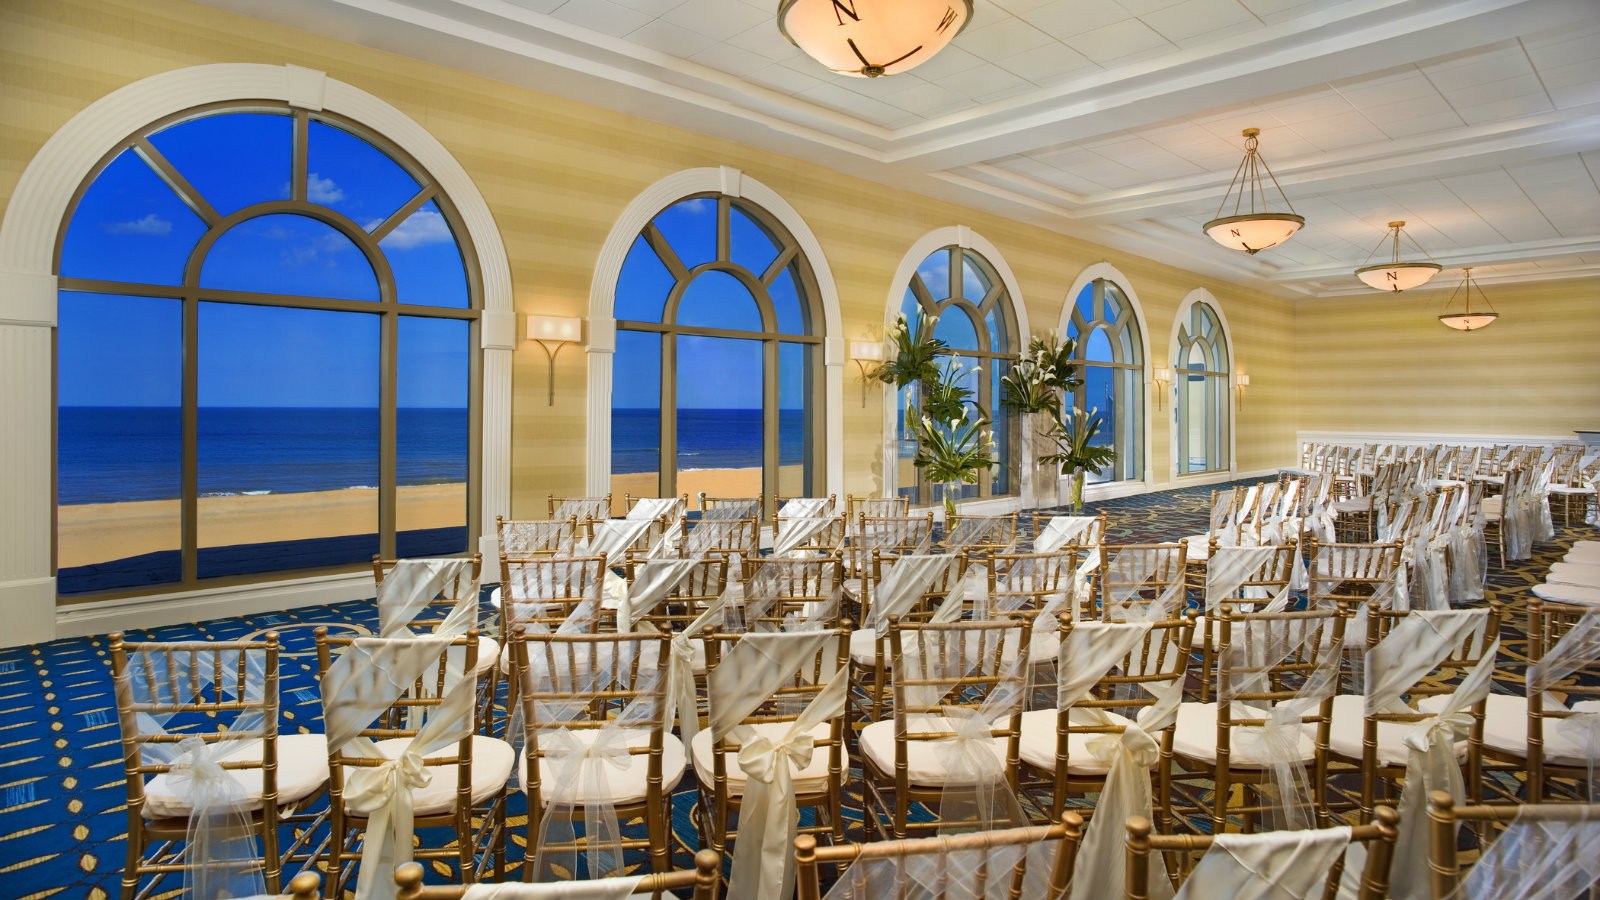 The Best Ideas for Wedding Venues Virginia Beach - Home, Family, Style